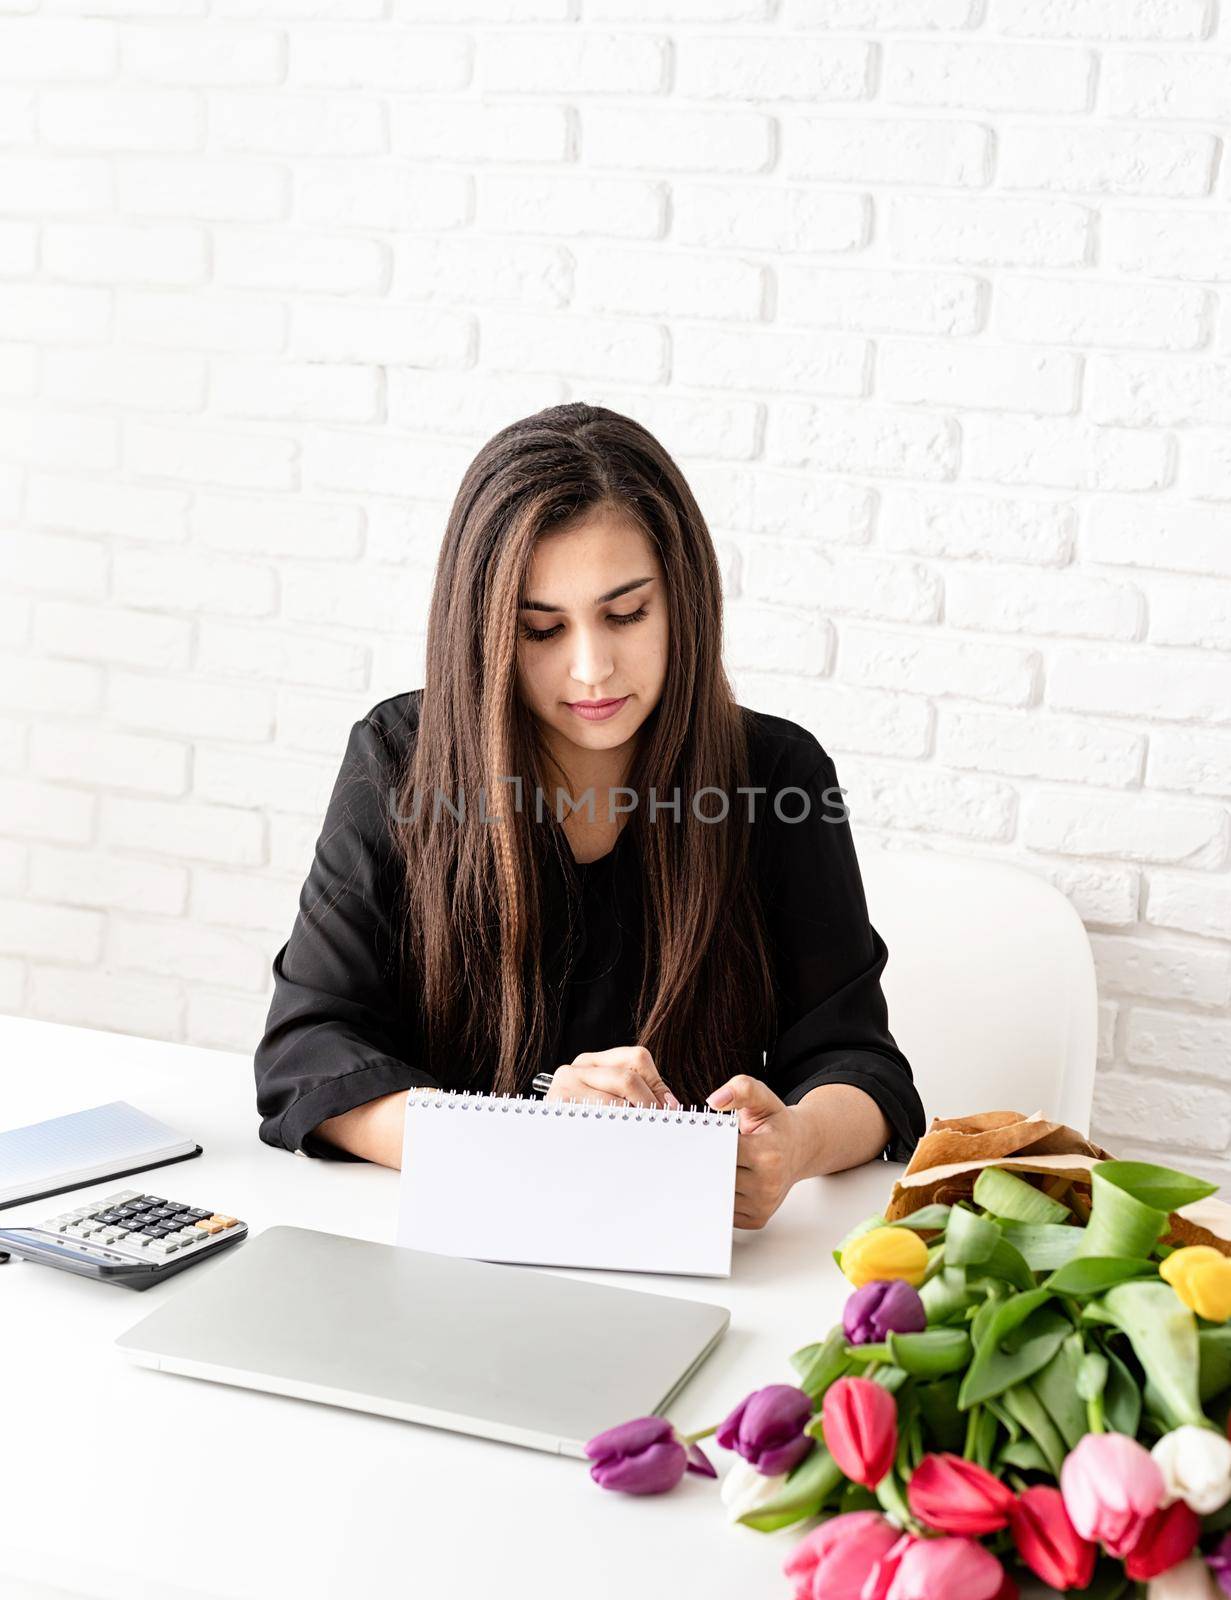 Small business concept. Spring holidays. Business woman making notes in blank desk calendar, working with flowers at the office. Mock up design